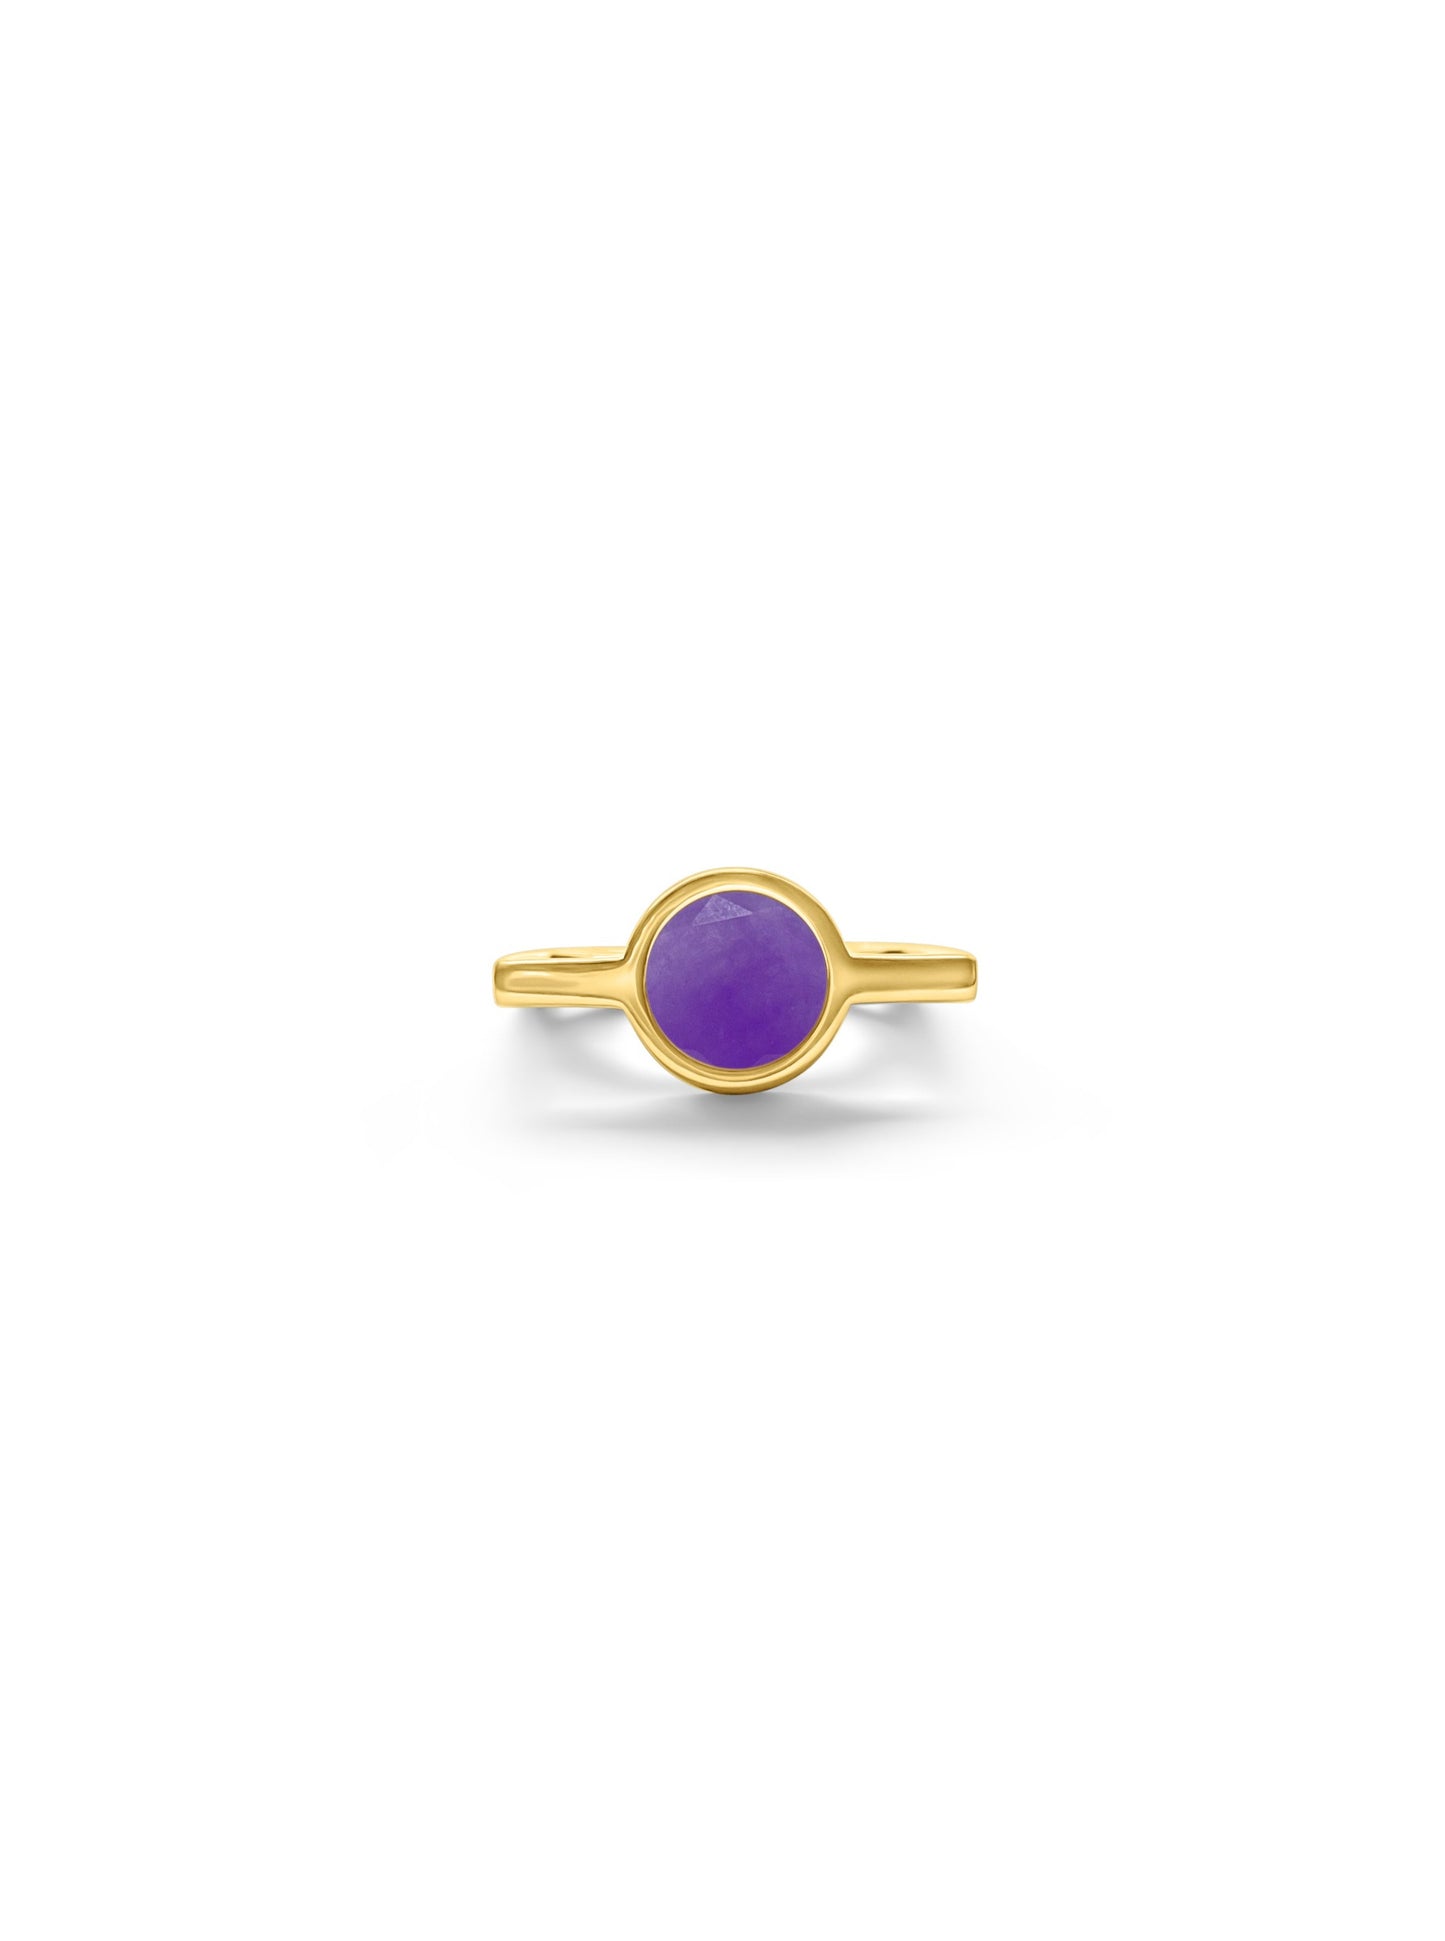 Pinky Ring - Fixed Gem